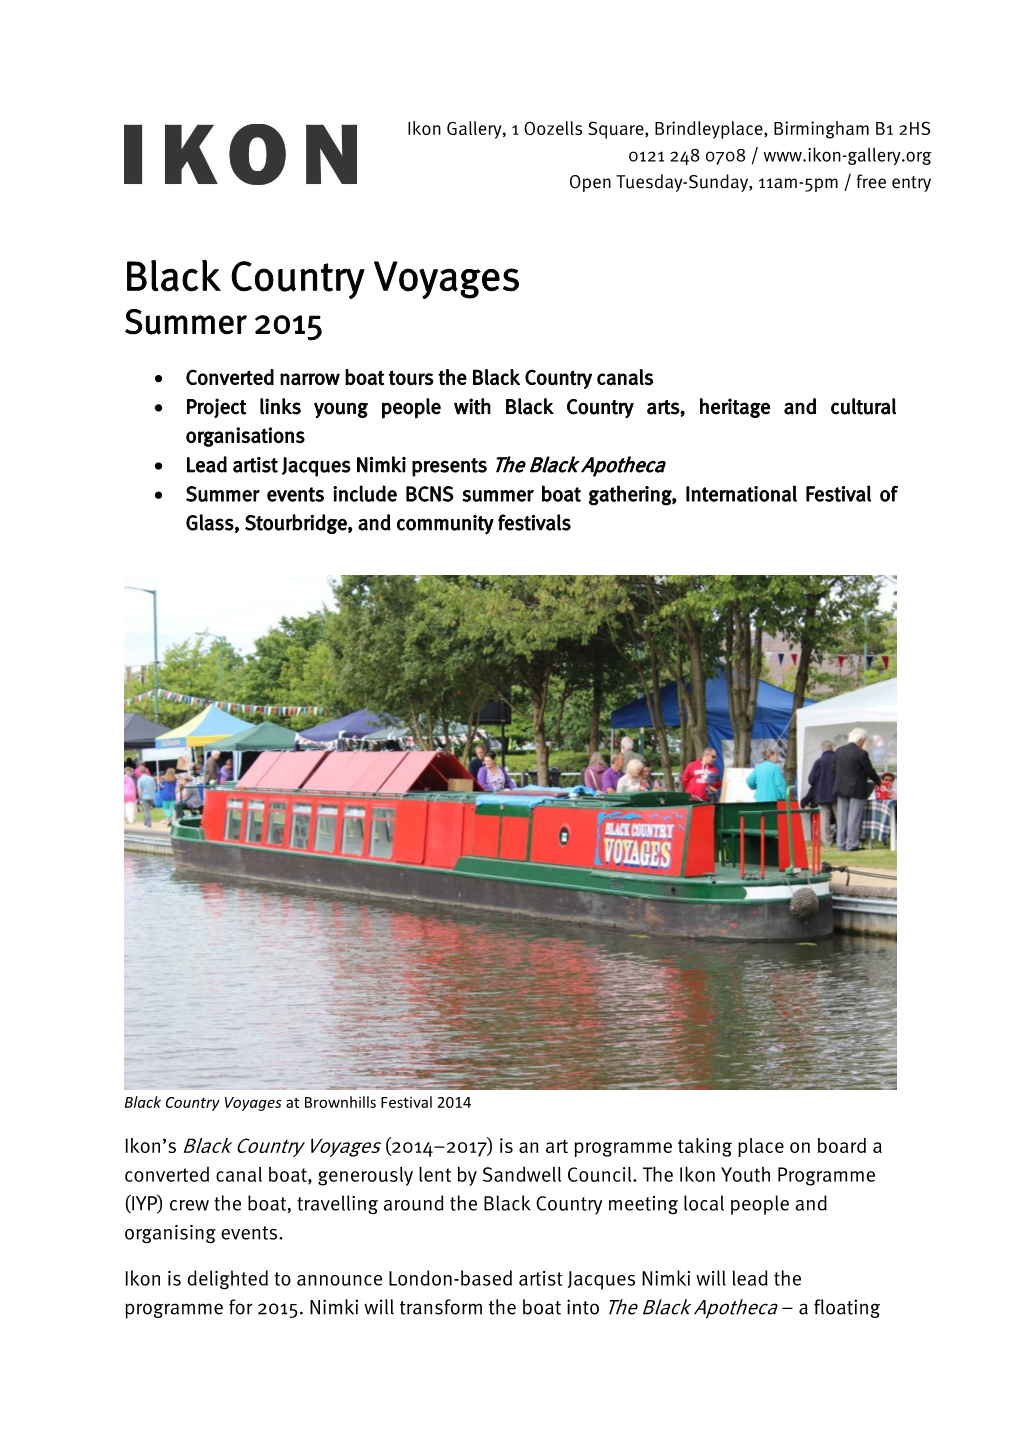 Black Country Voyages 2015